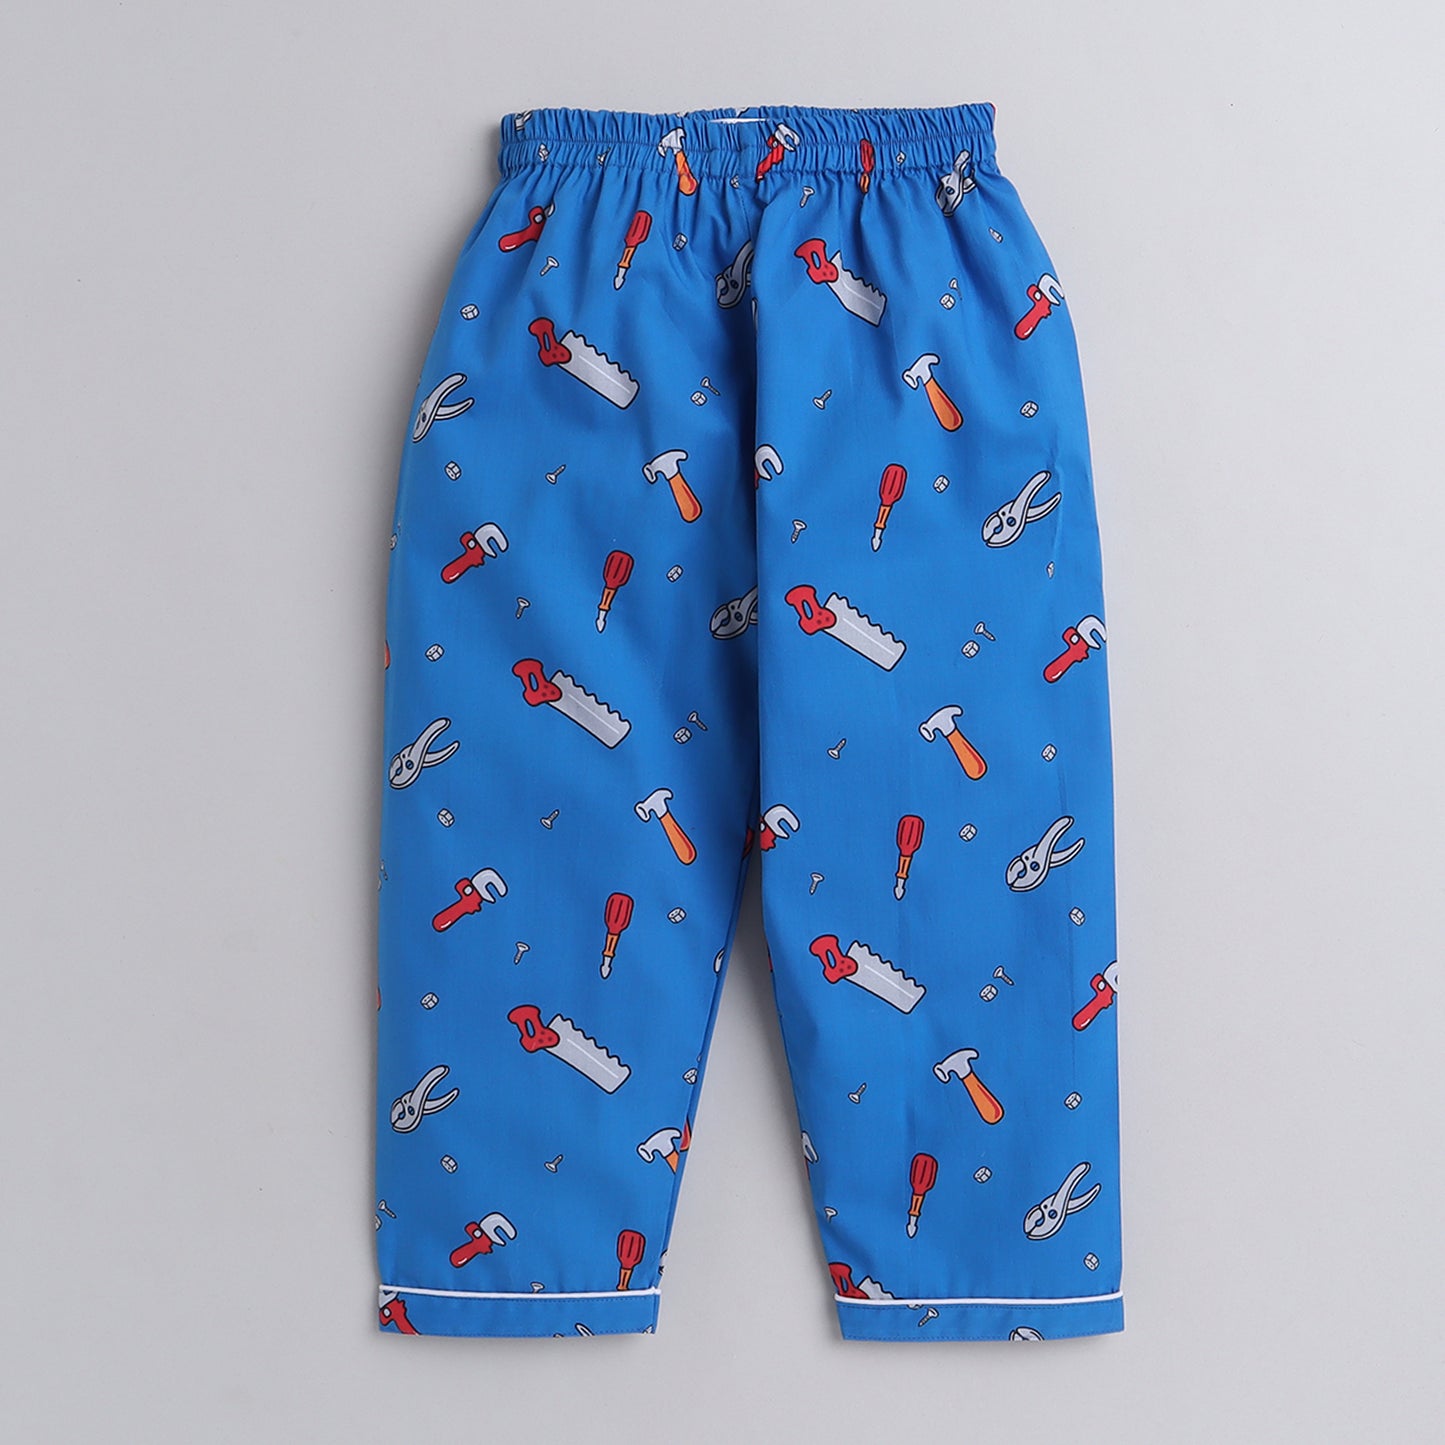 Knitting Doodles Pure Cotton Kid's Blue Tool Box Print Nightsuit- Blue